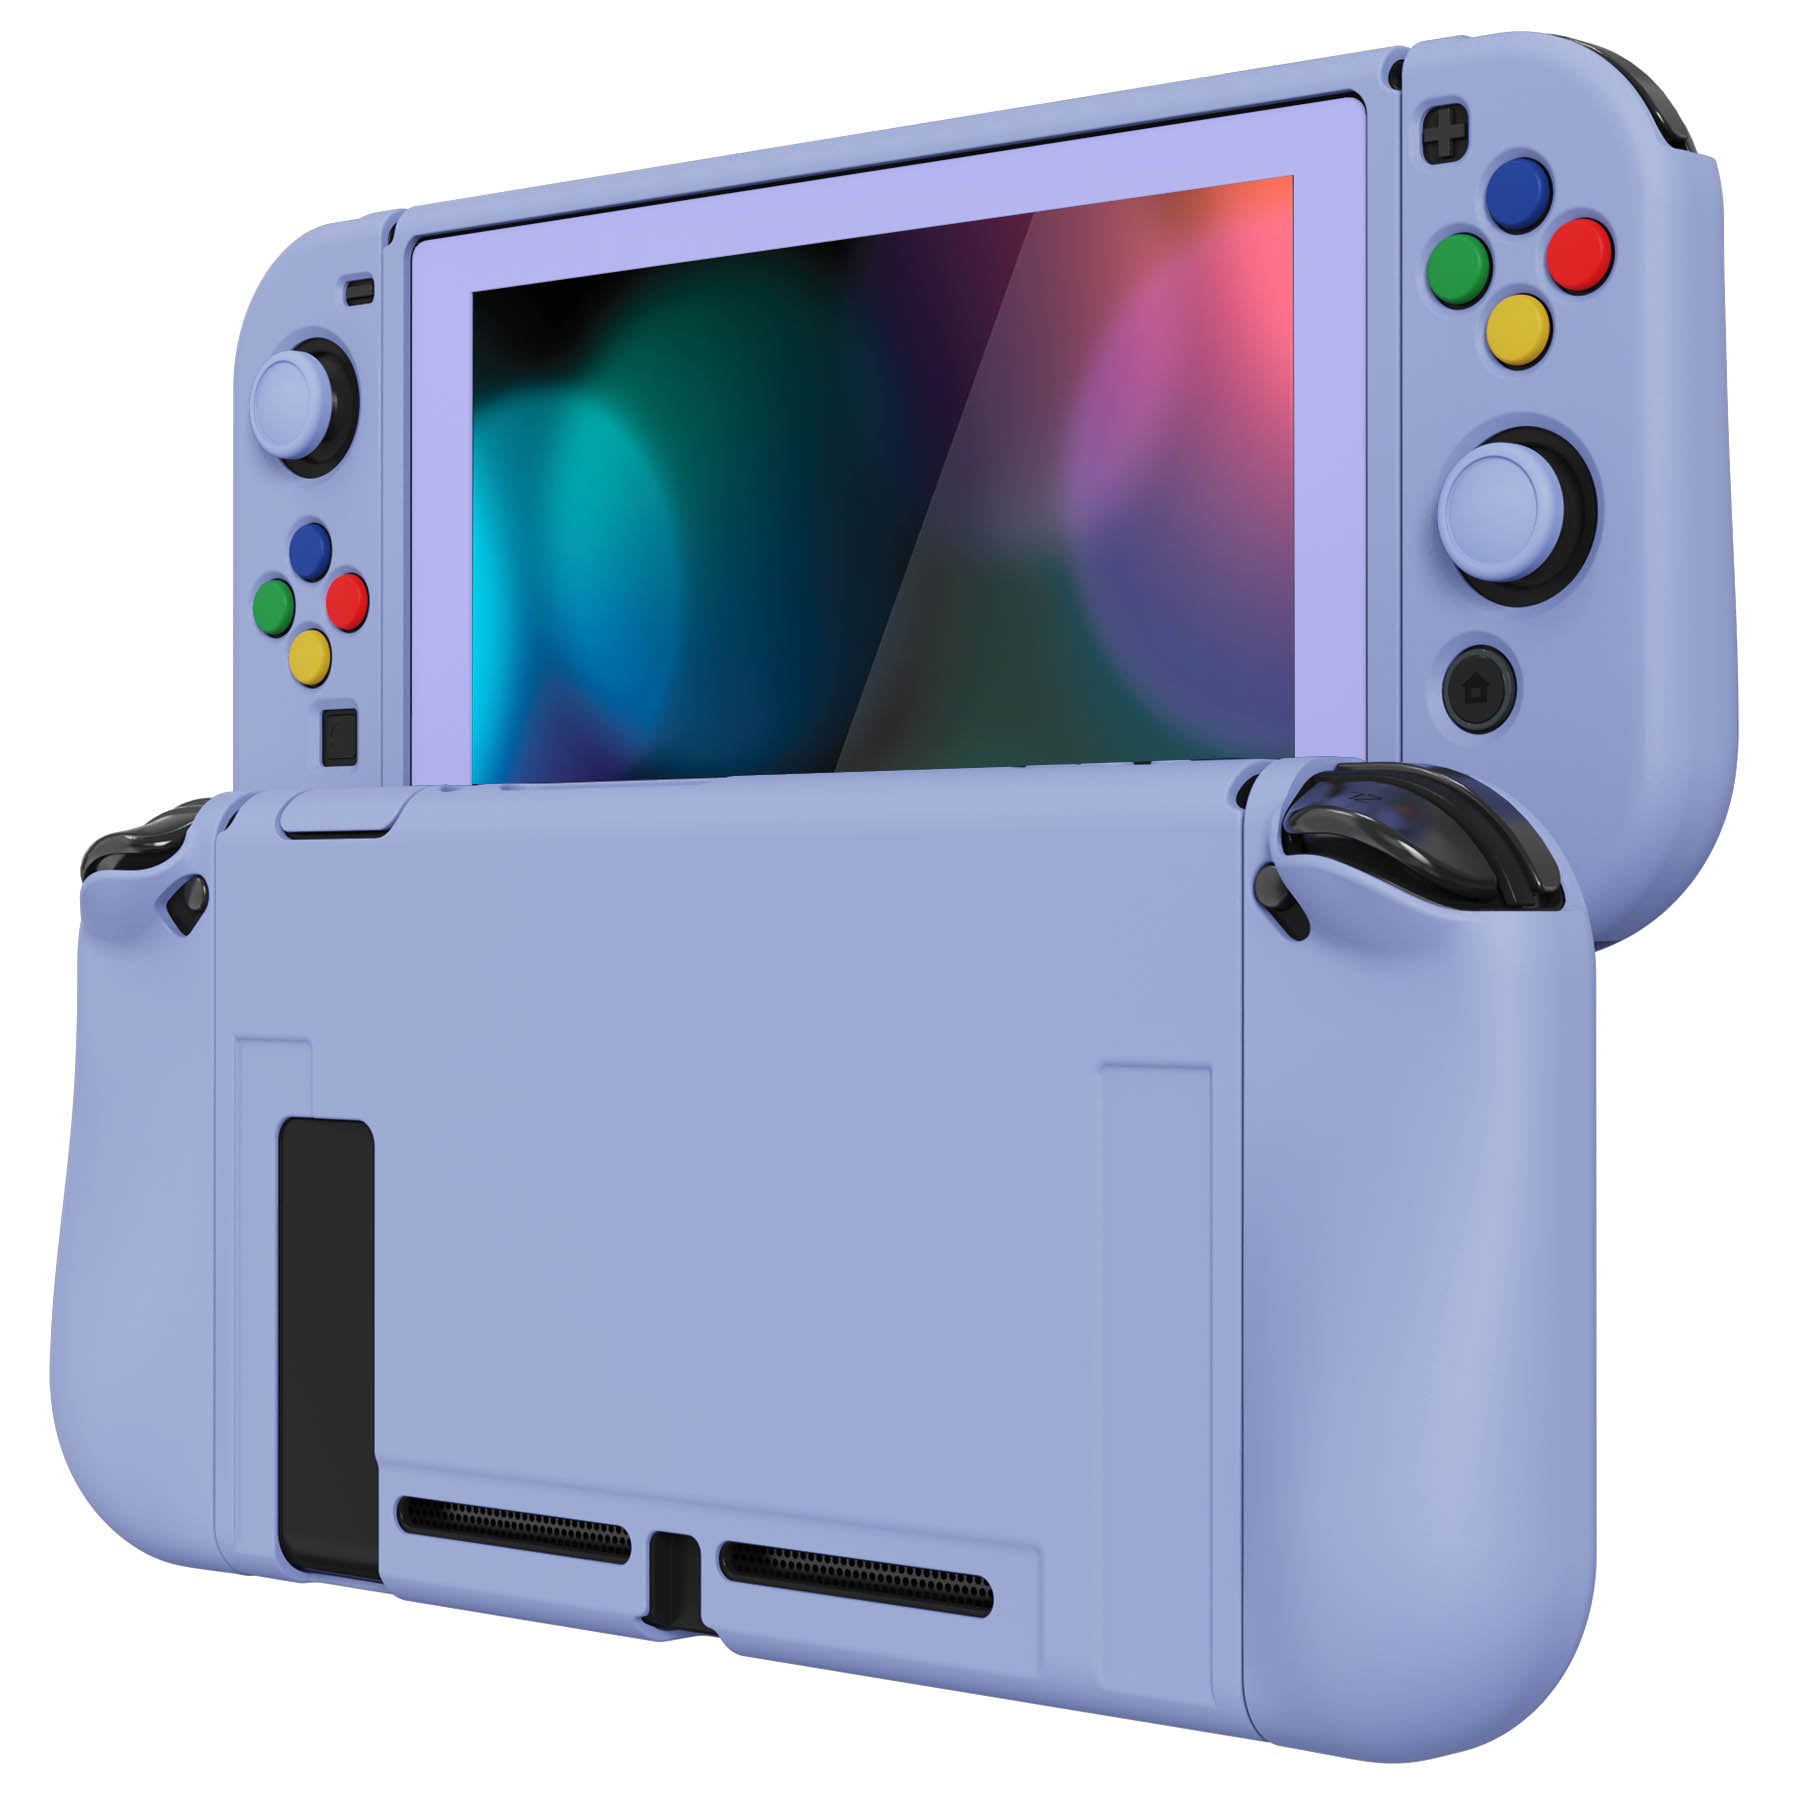 PlayVital ZealProtect Soft Protective Case for Nintendo Switch, Flexible Cover for Switch with Tempered Glass Screen Protector & Thumb Grips & ABXY Direction Button Caps - Light Violet - RNSYM5003 playvital